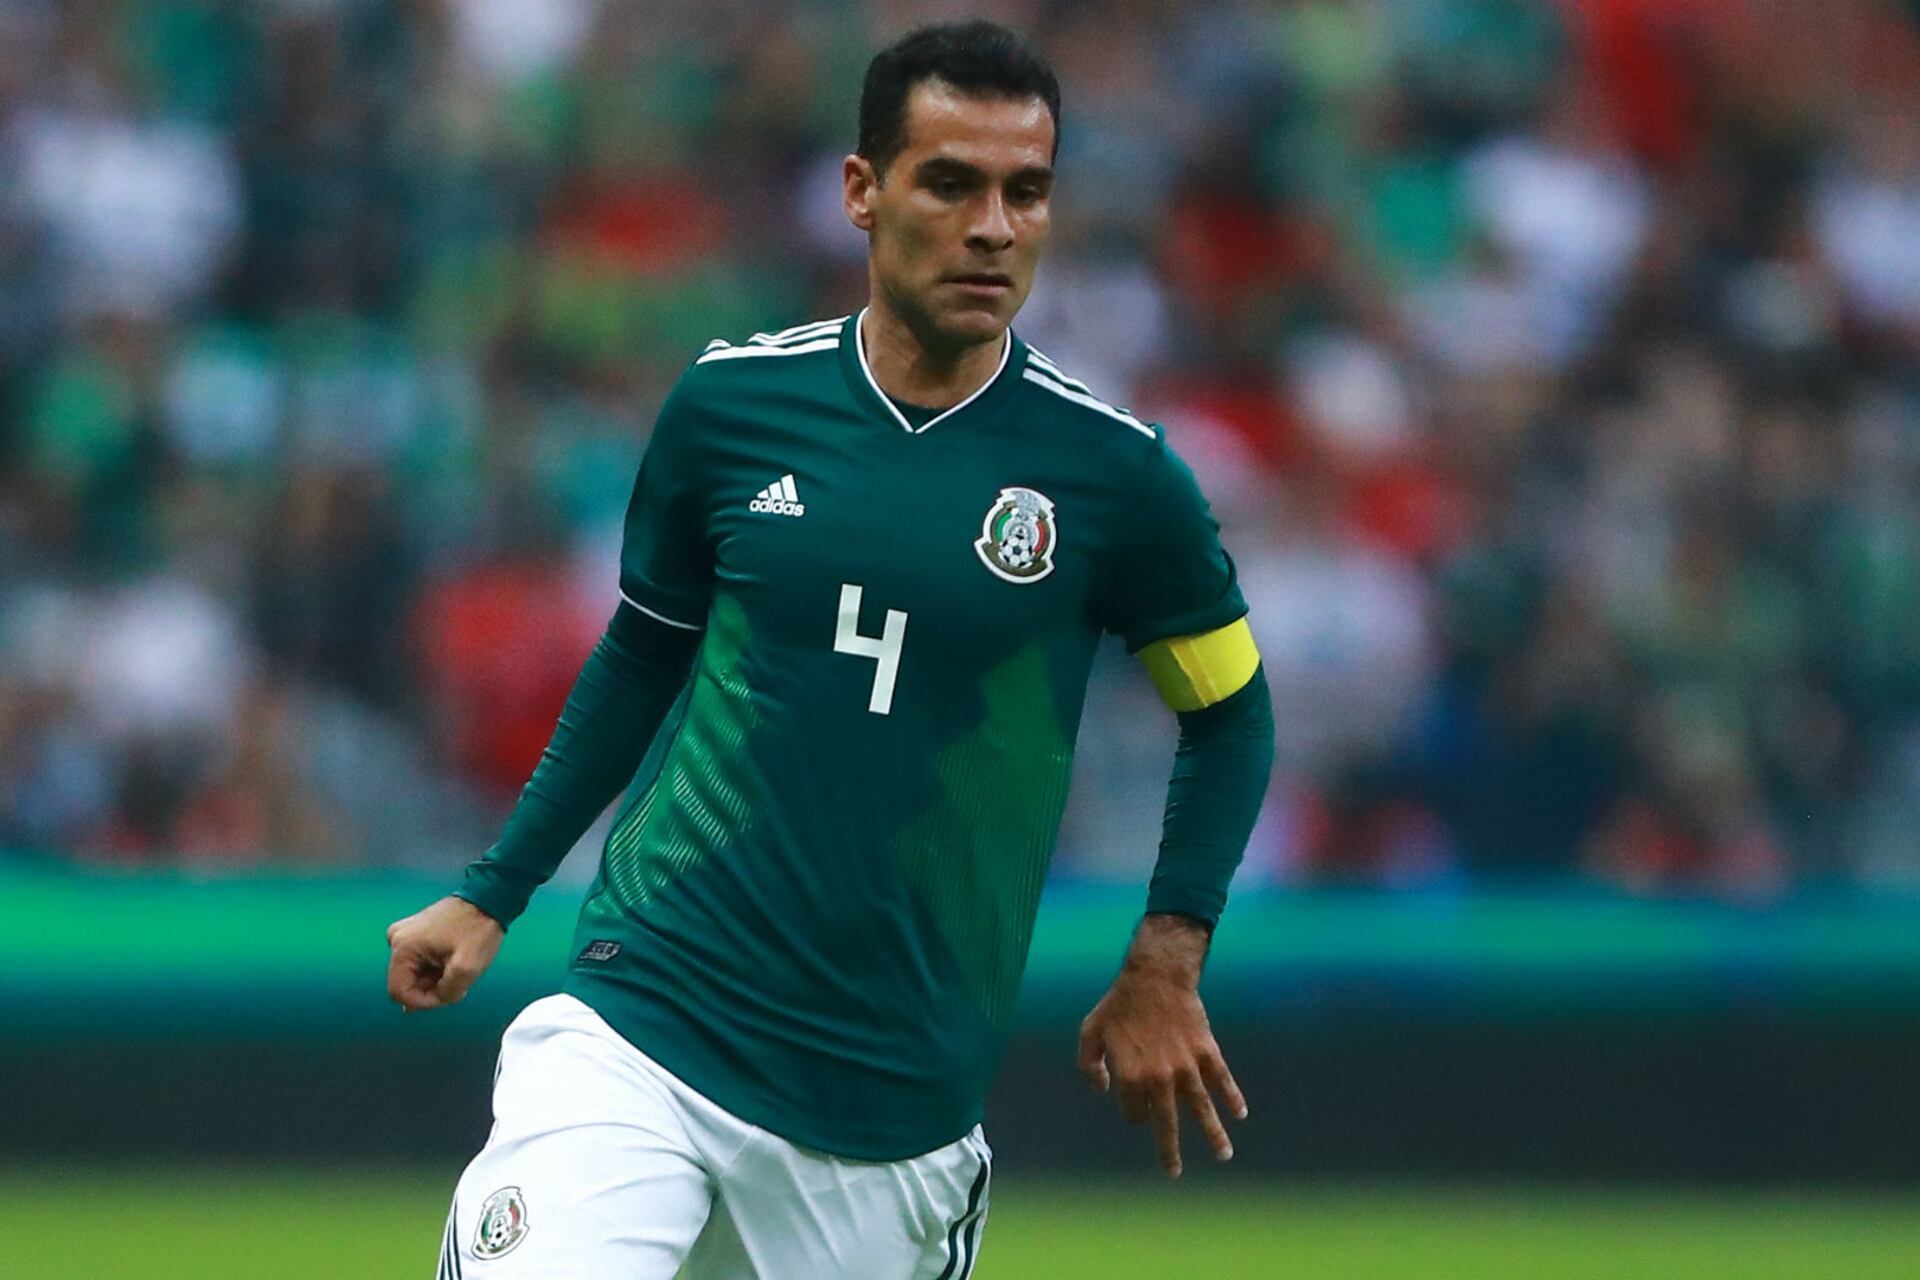 Rafa Marquez black list: these are the other players involved in drug trafficking